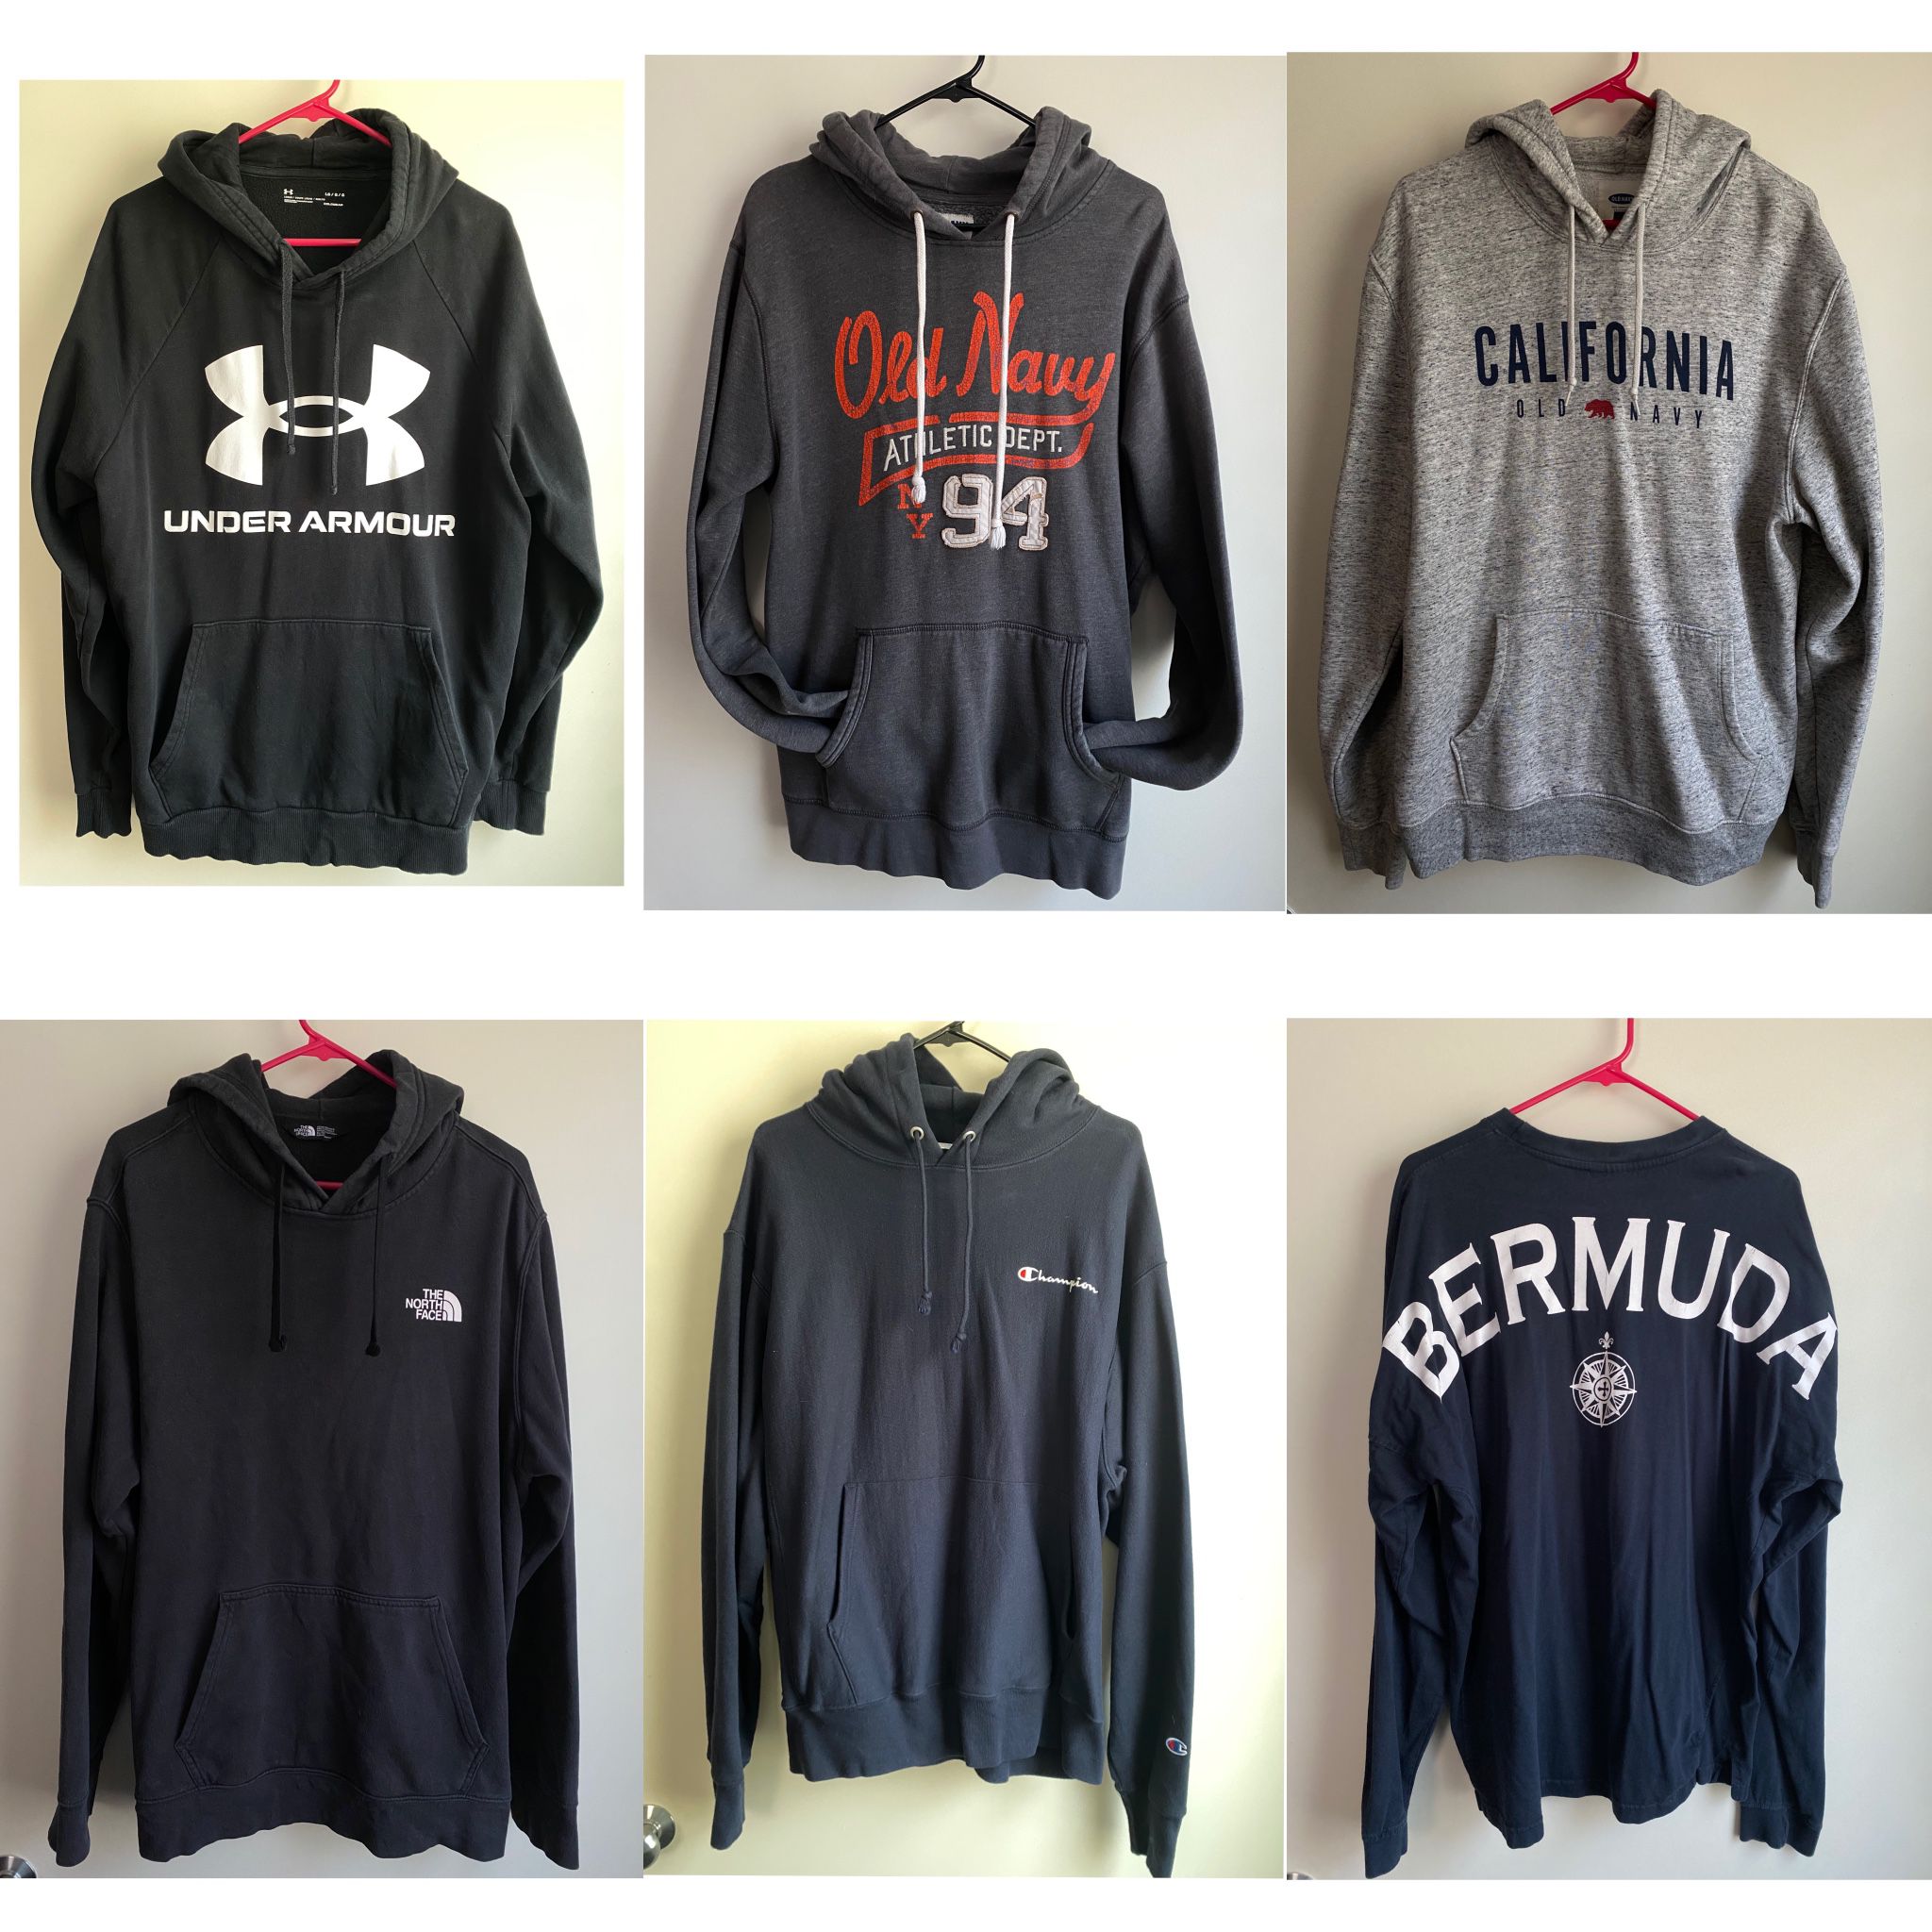 MENS CLOTHES - Nike Old Navy Carhartt Under Armour dress shirts hoodie north face